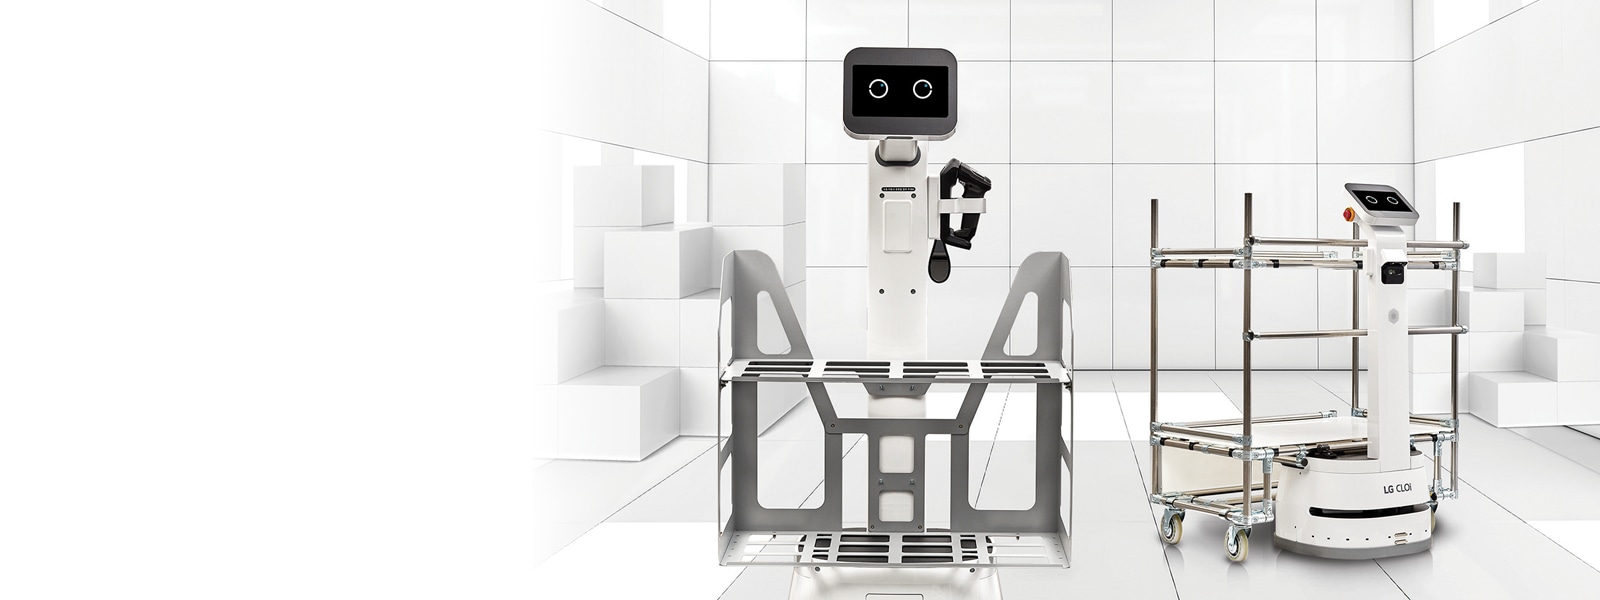 Automate your warehouse with CLOi CarryBots